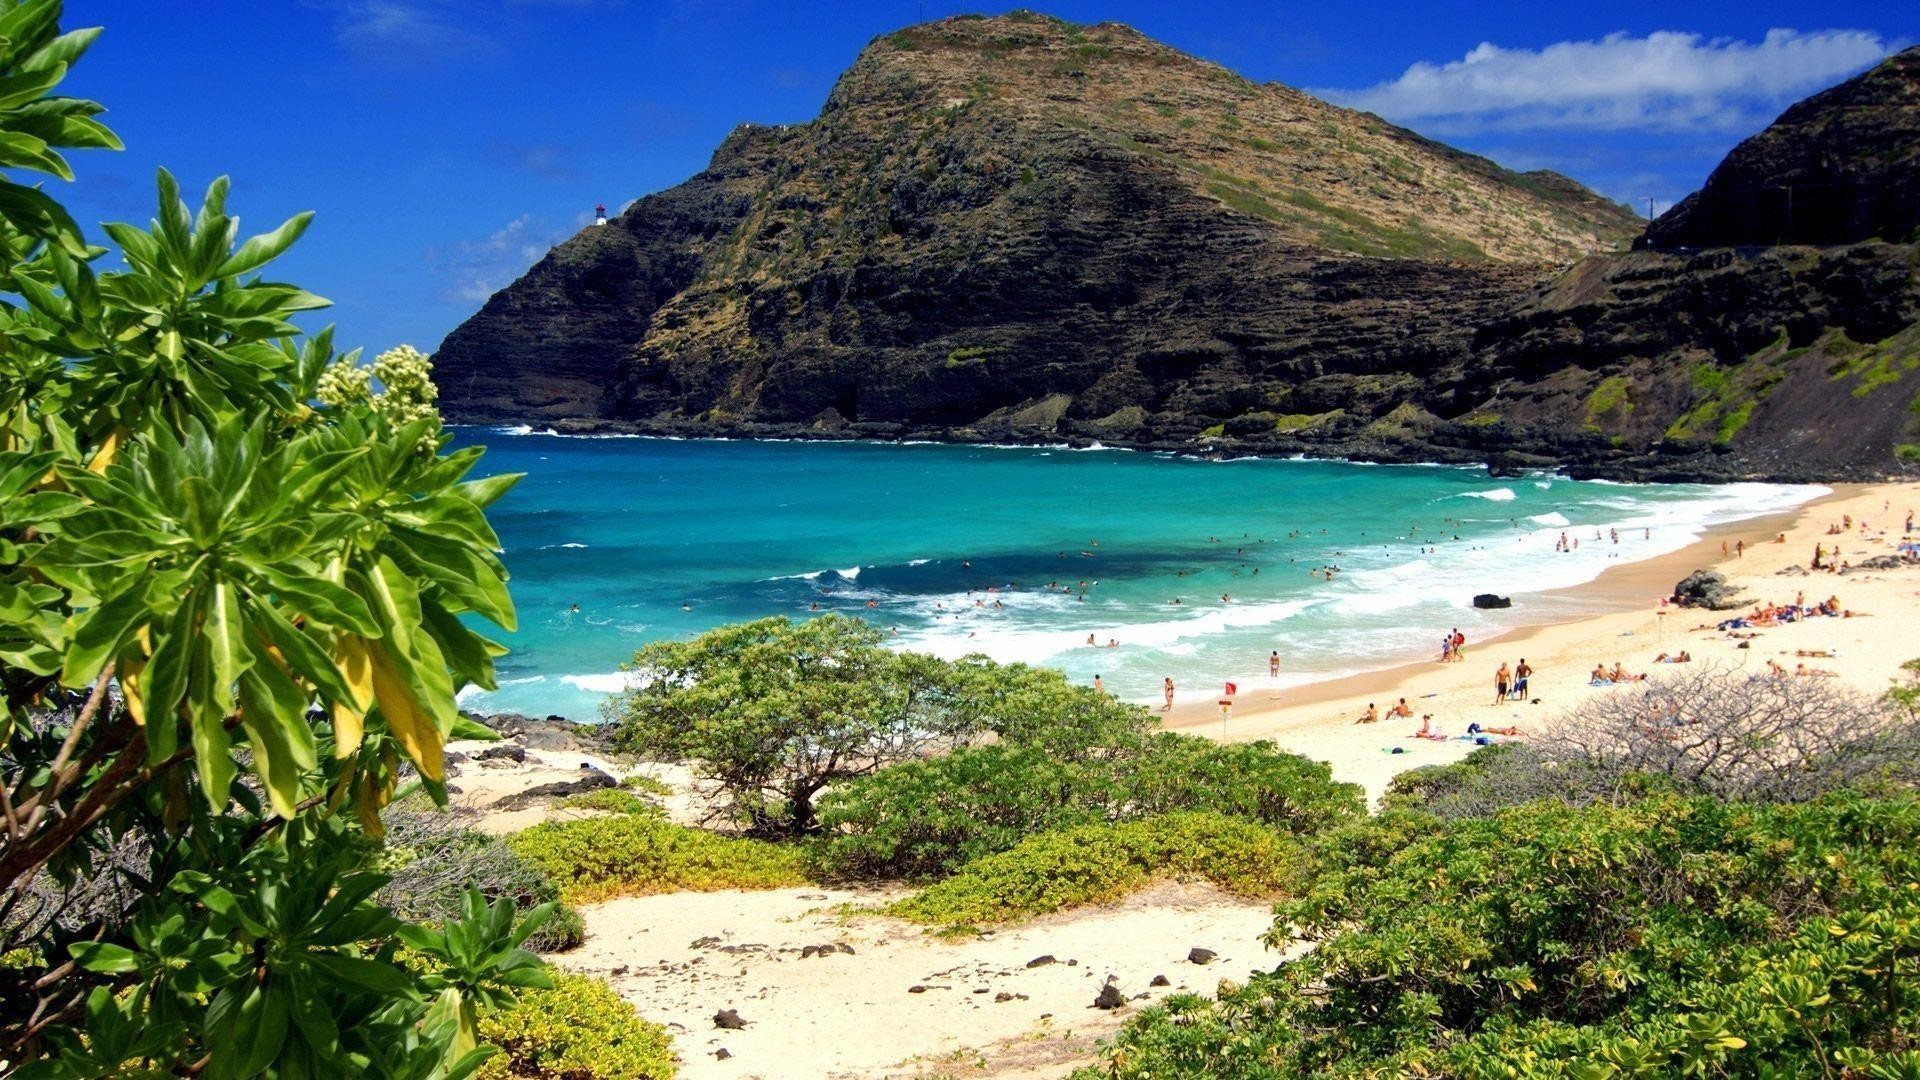 1080P Oahu Landscape Picture Background,Hawaii hd wallpapers .